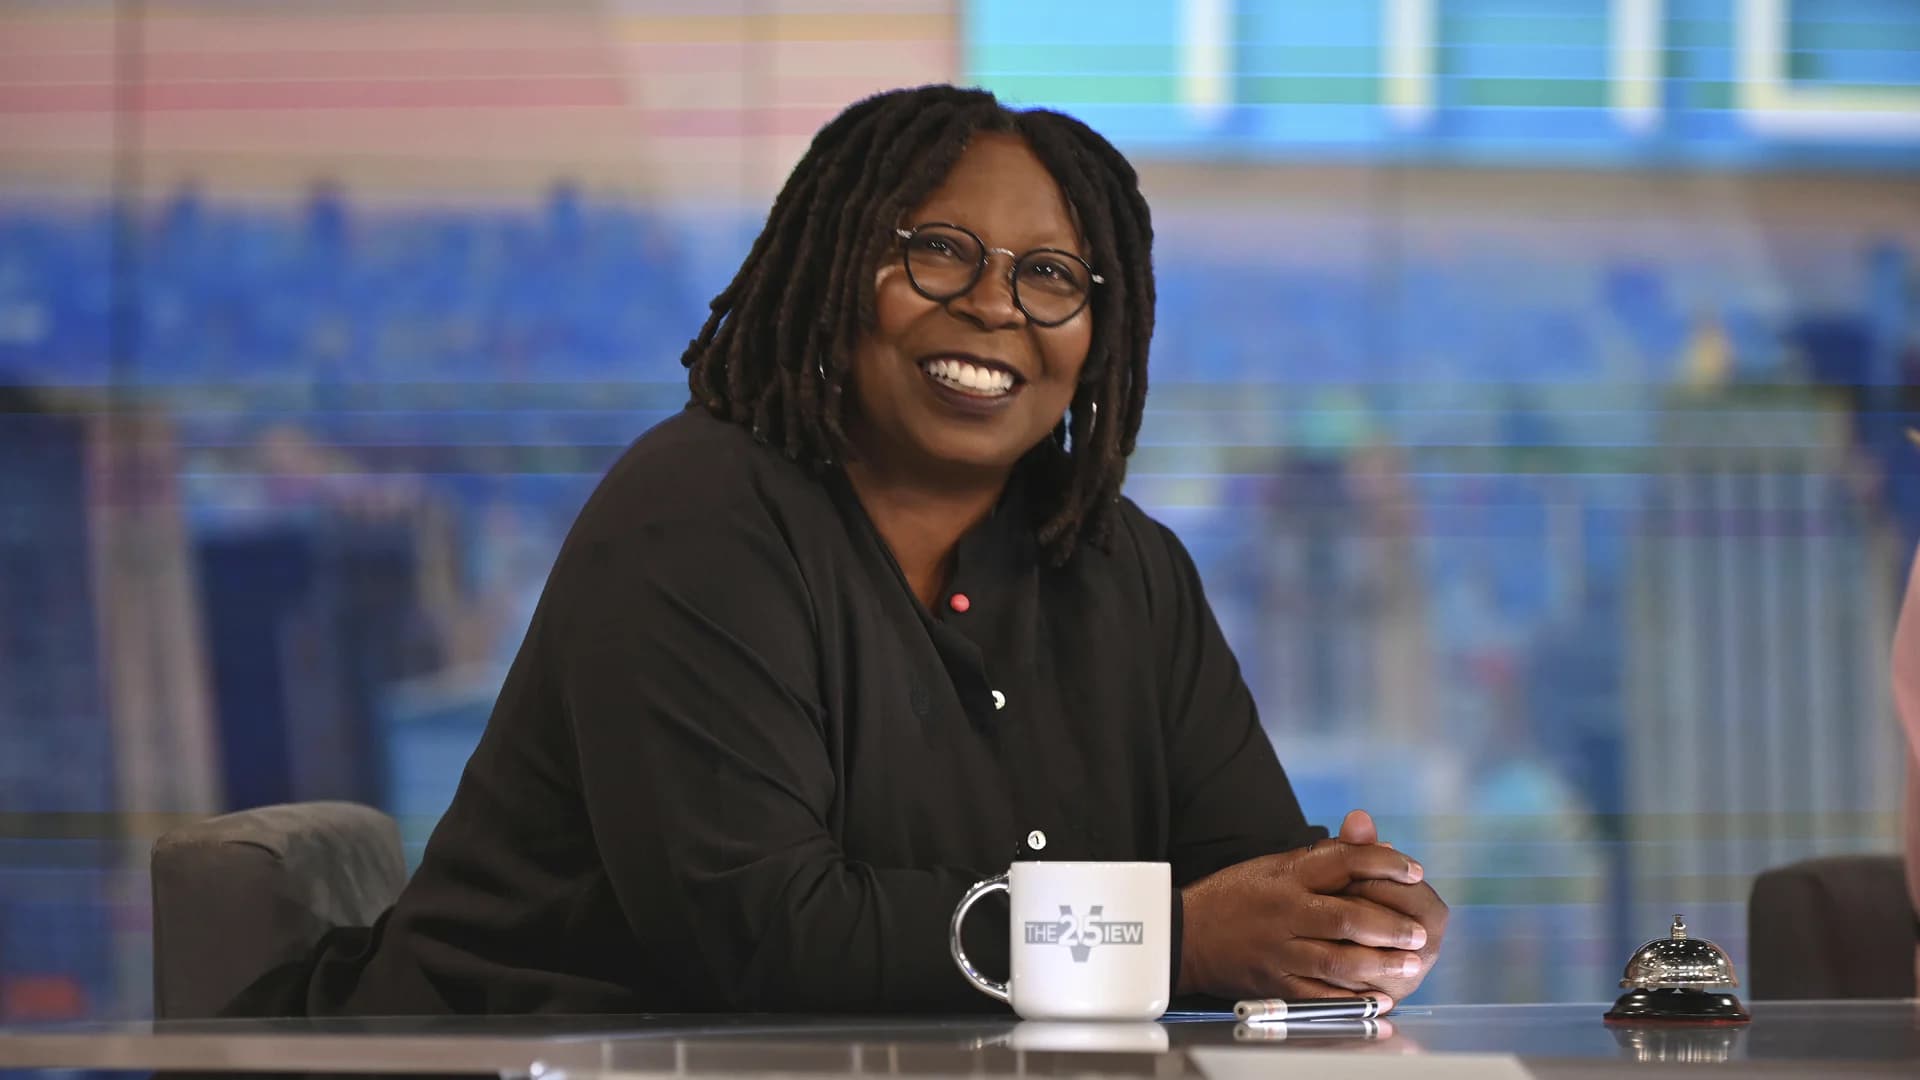 Whoopi Goldberg returns to 'The View' after suspension